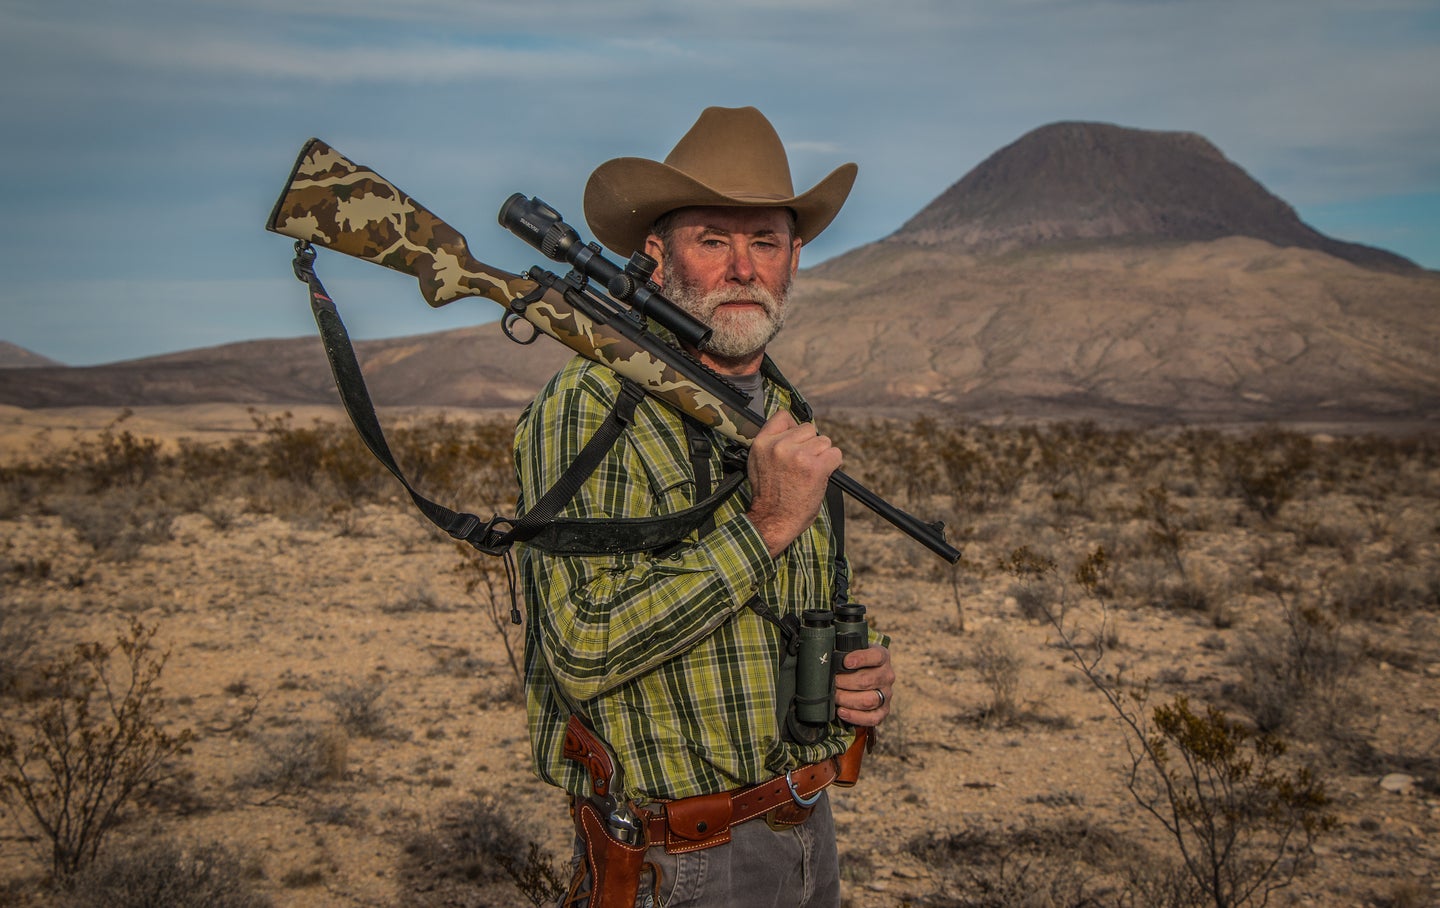 Man holding a great hunting rifle in a desert